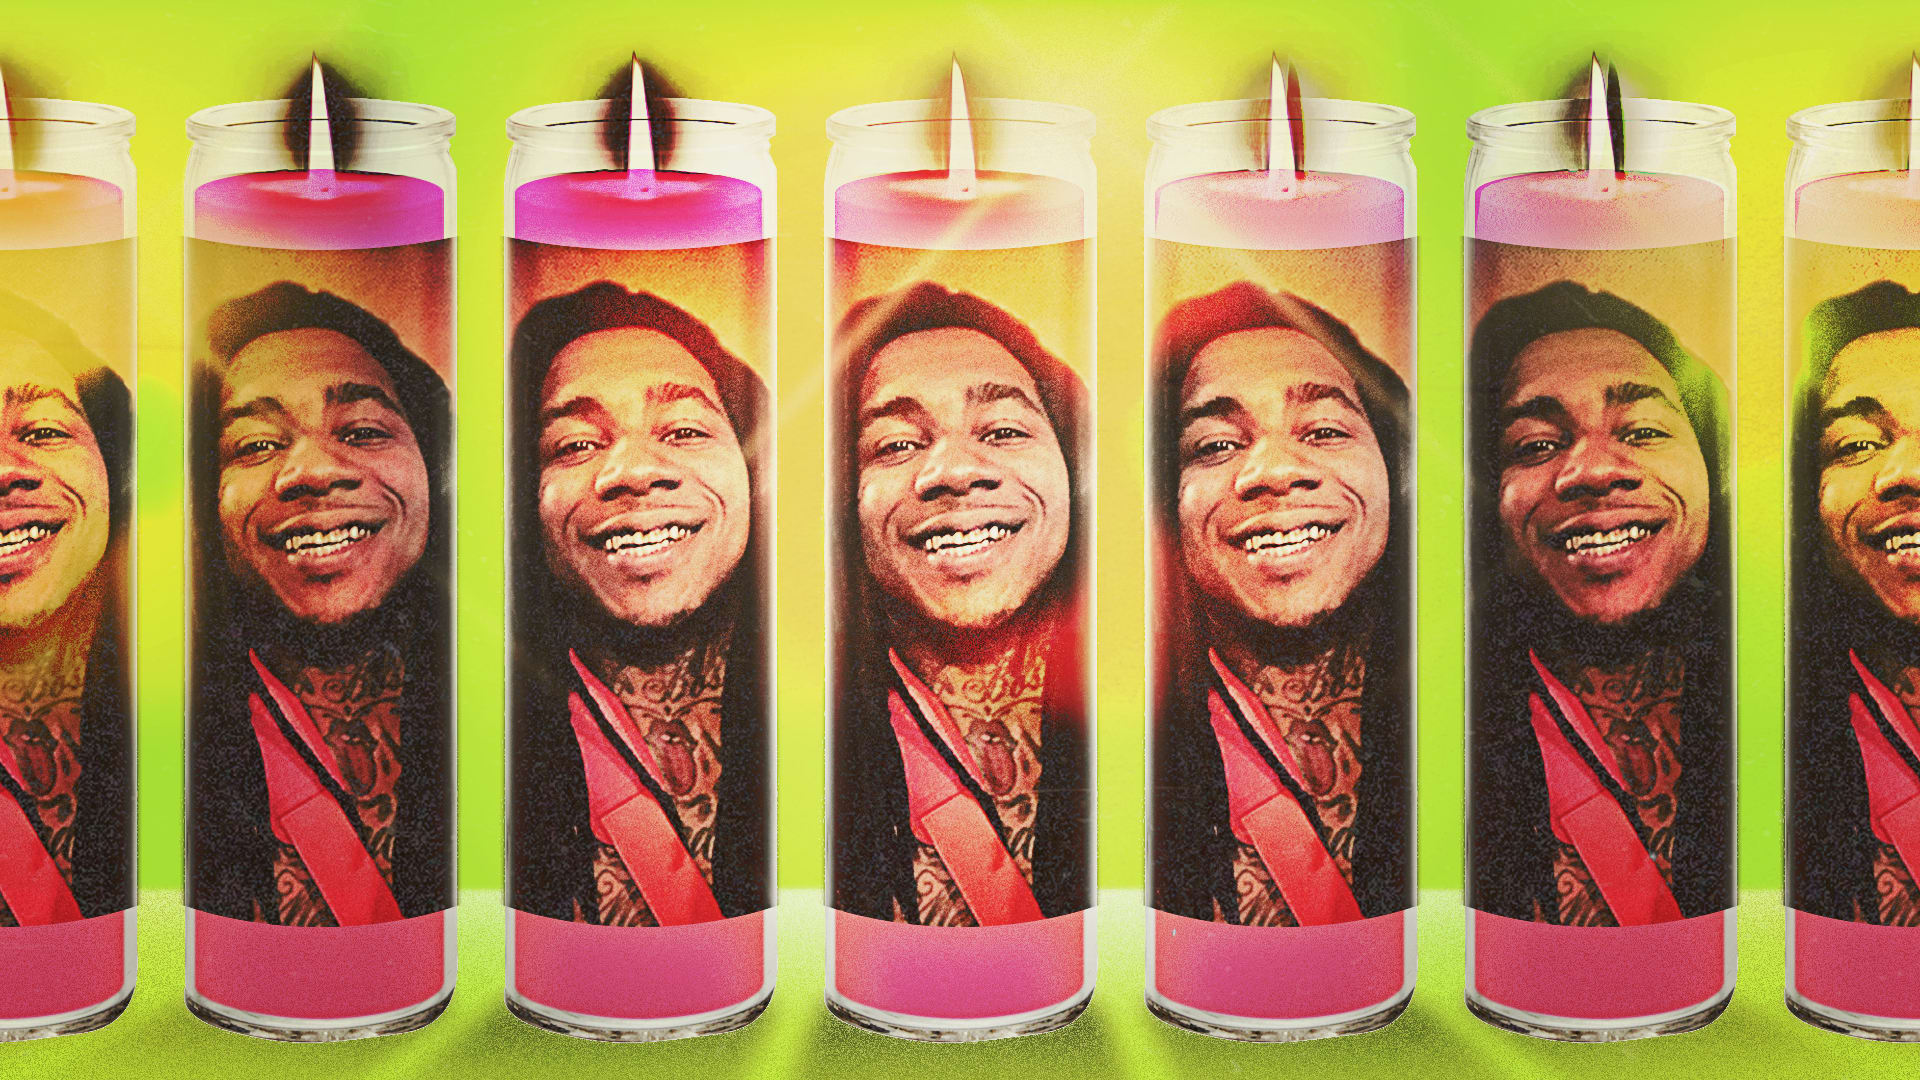 Lil b pictures